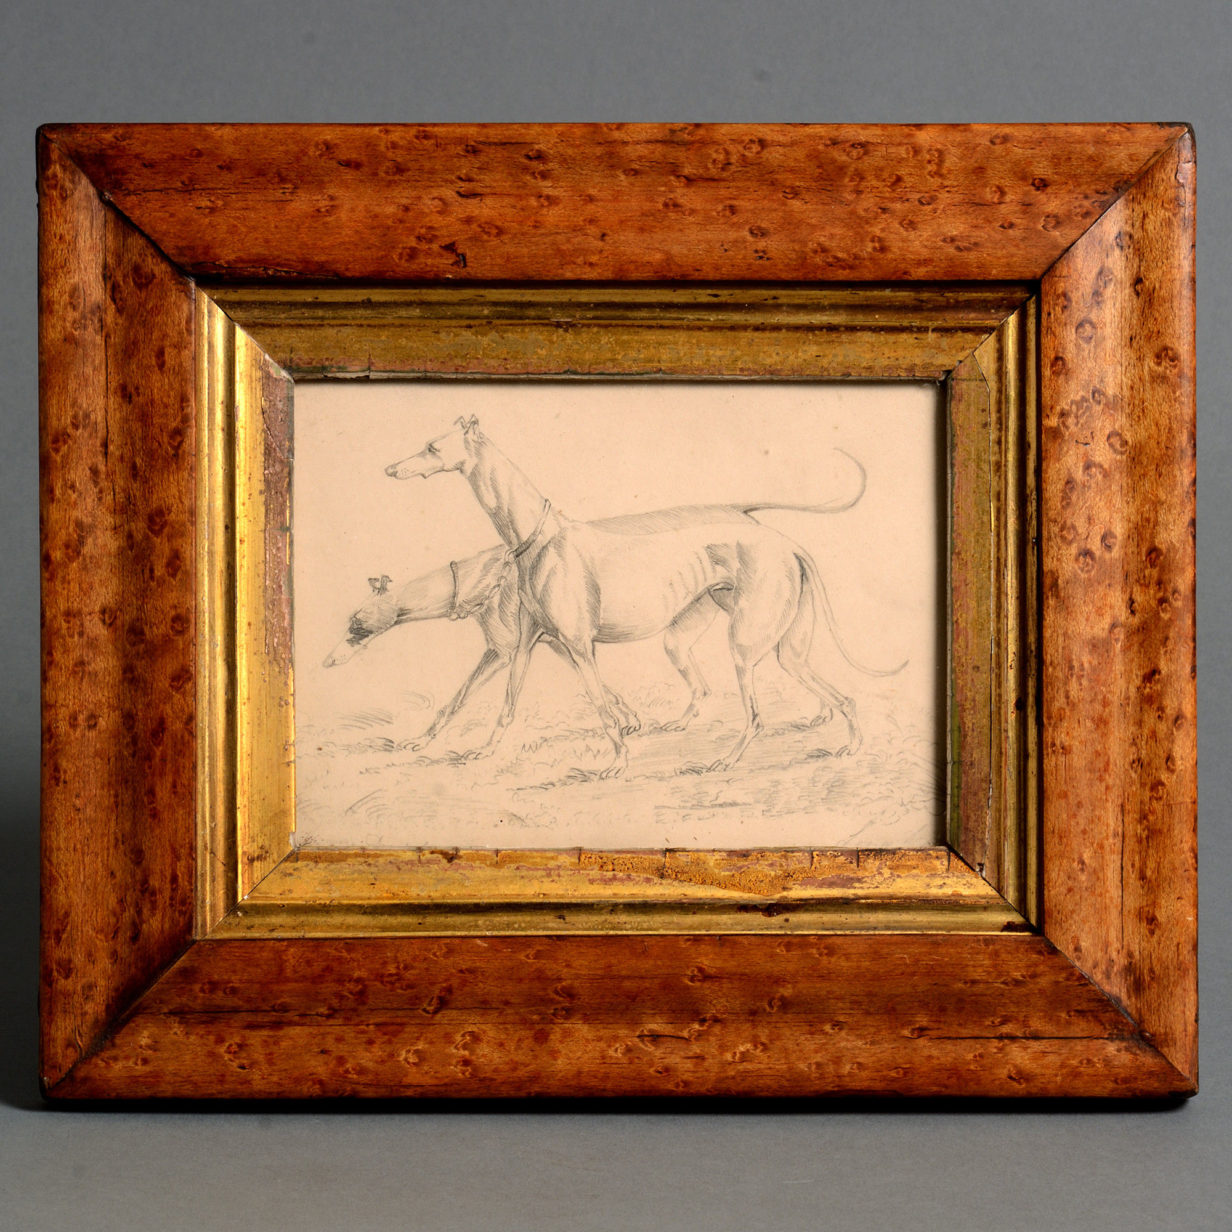 A 19th century dog portrait pencil sketch of two greyhounds